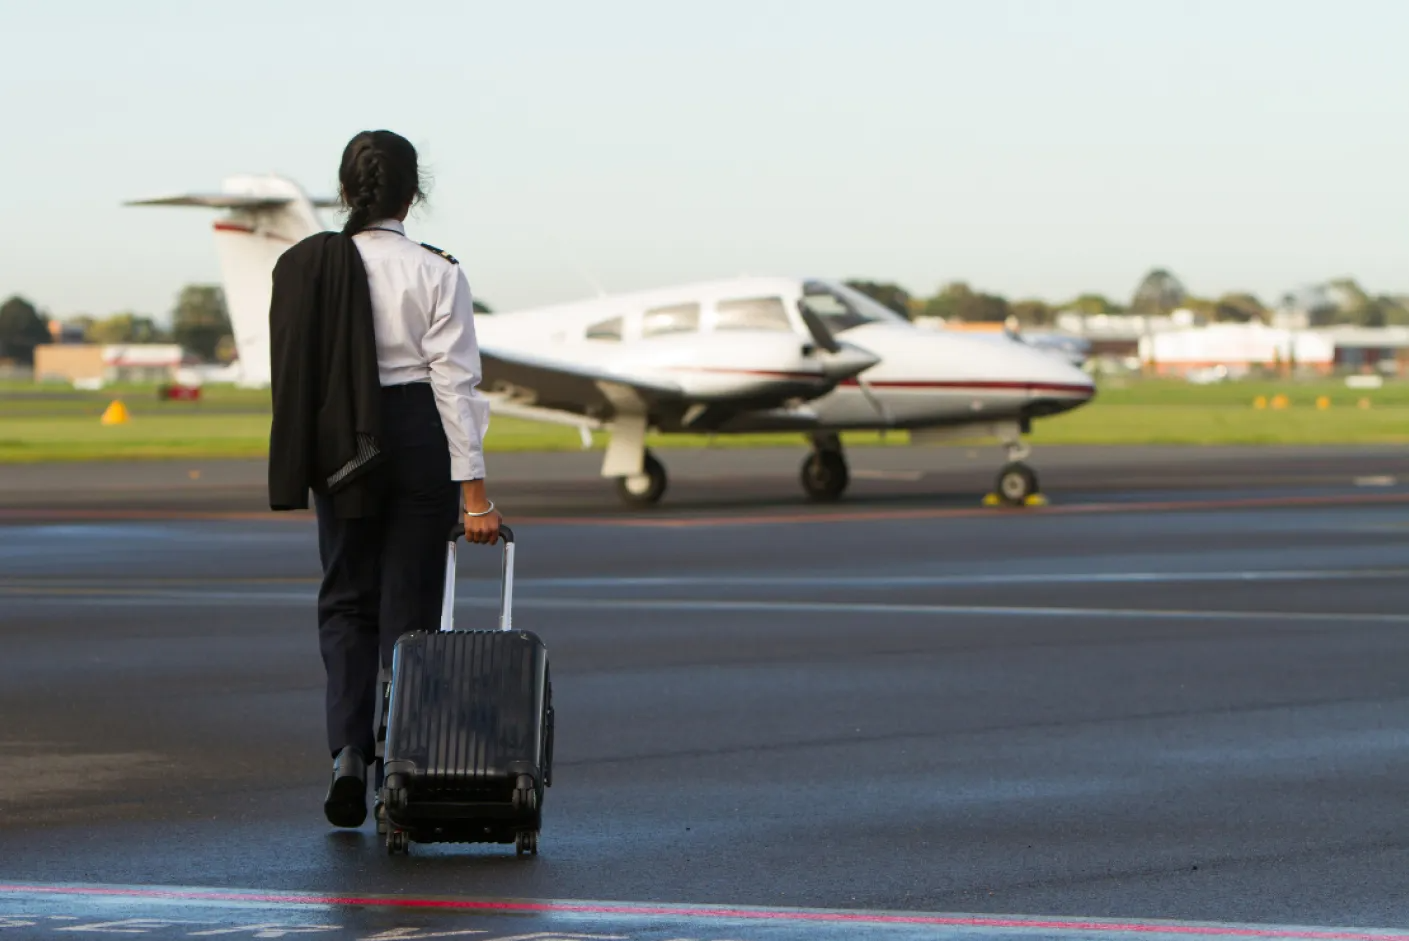 Private pilot license test in Canada: Tips to ace the official examination